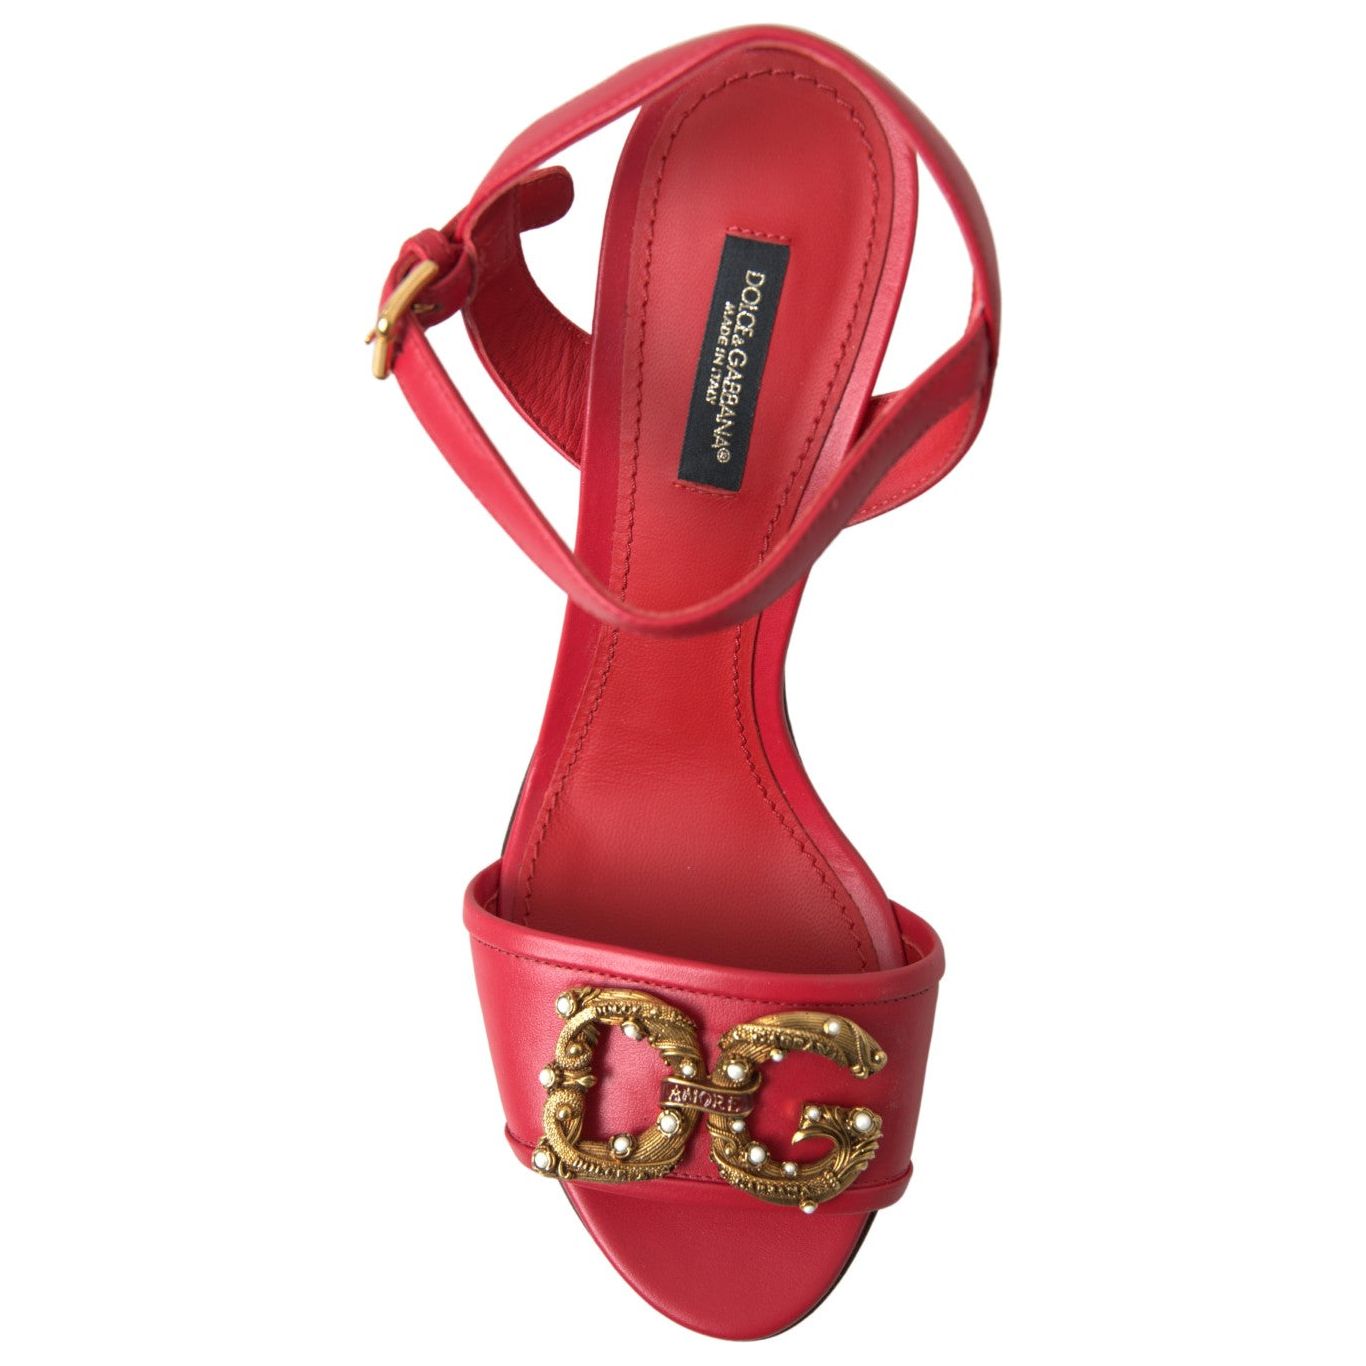 Dolce & Gabbana Red Stiletto Sandal Heels red-ankle-strap-stiletto-heels-sandals-shoes